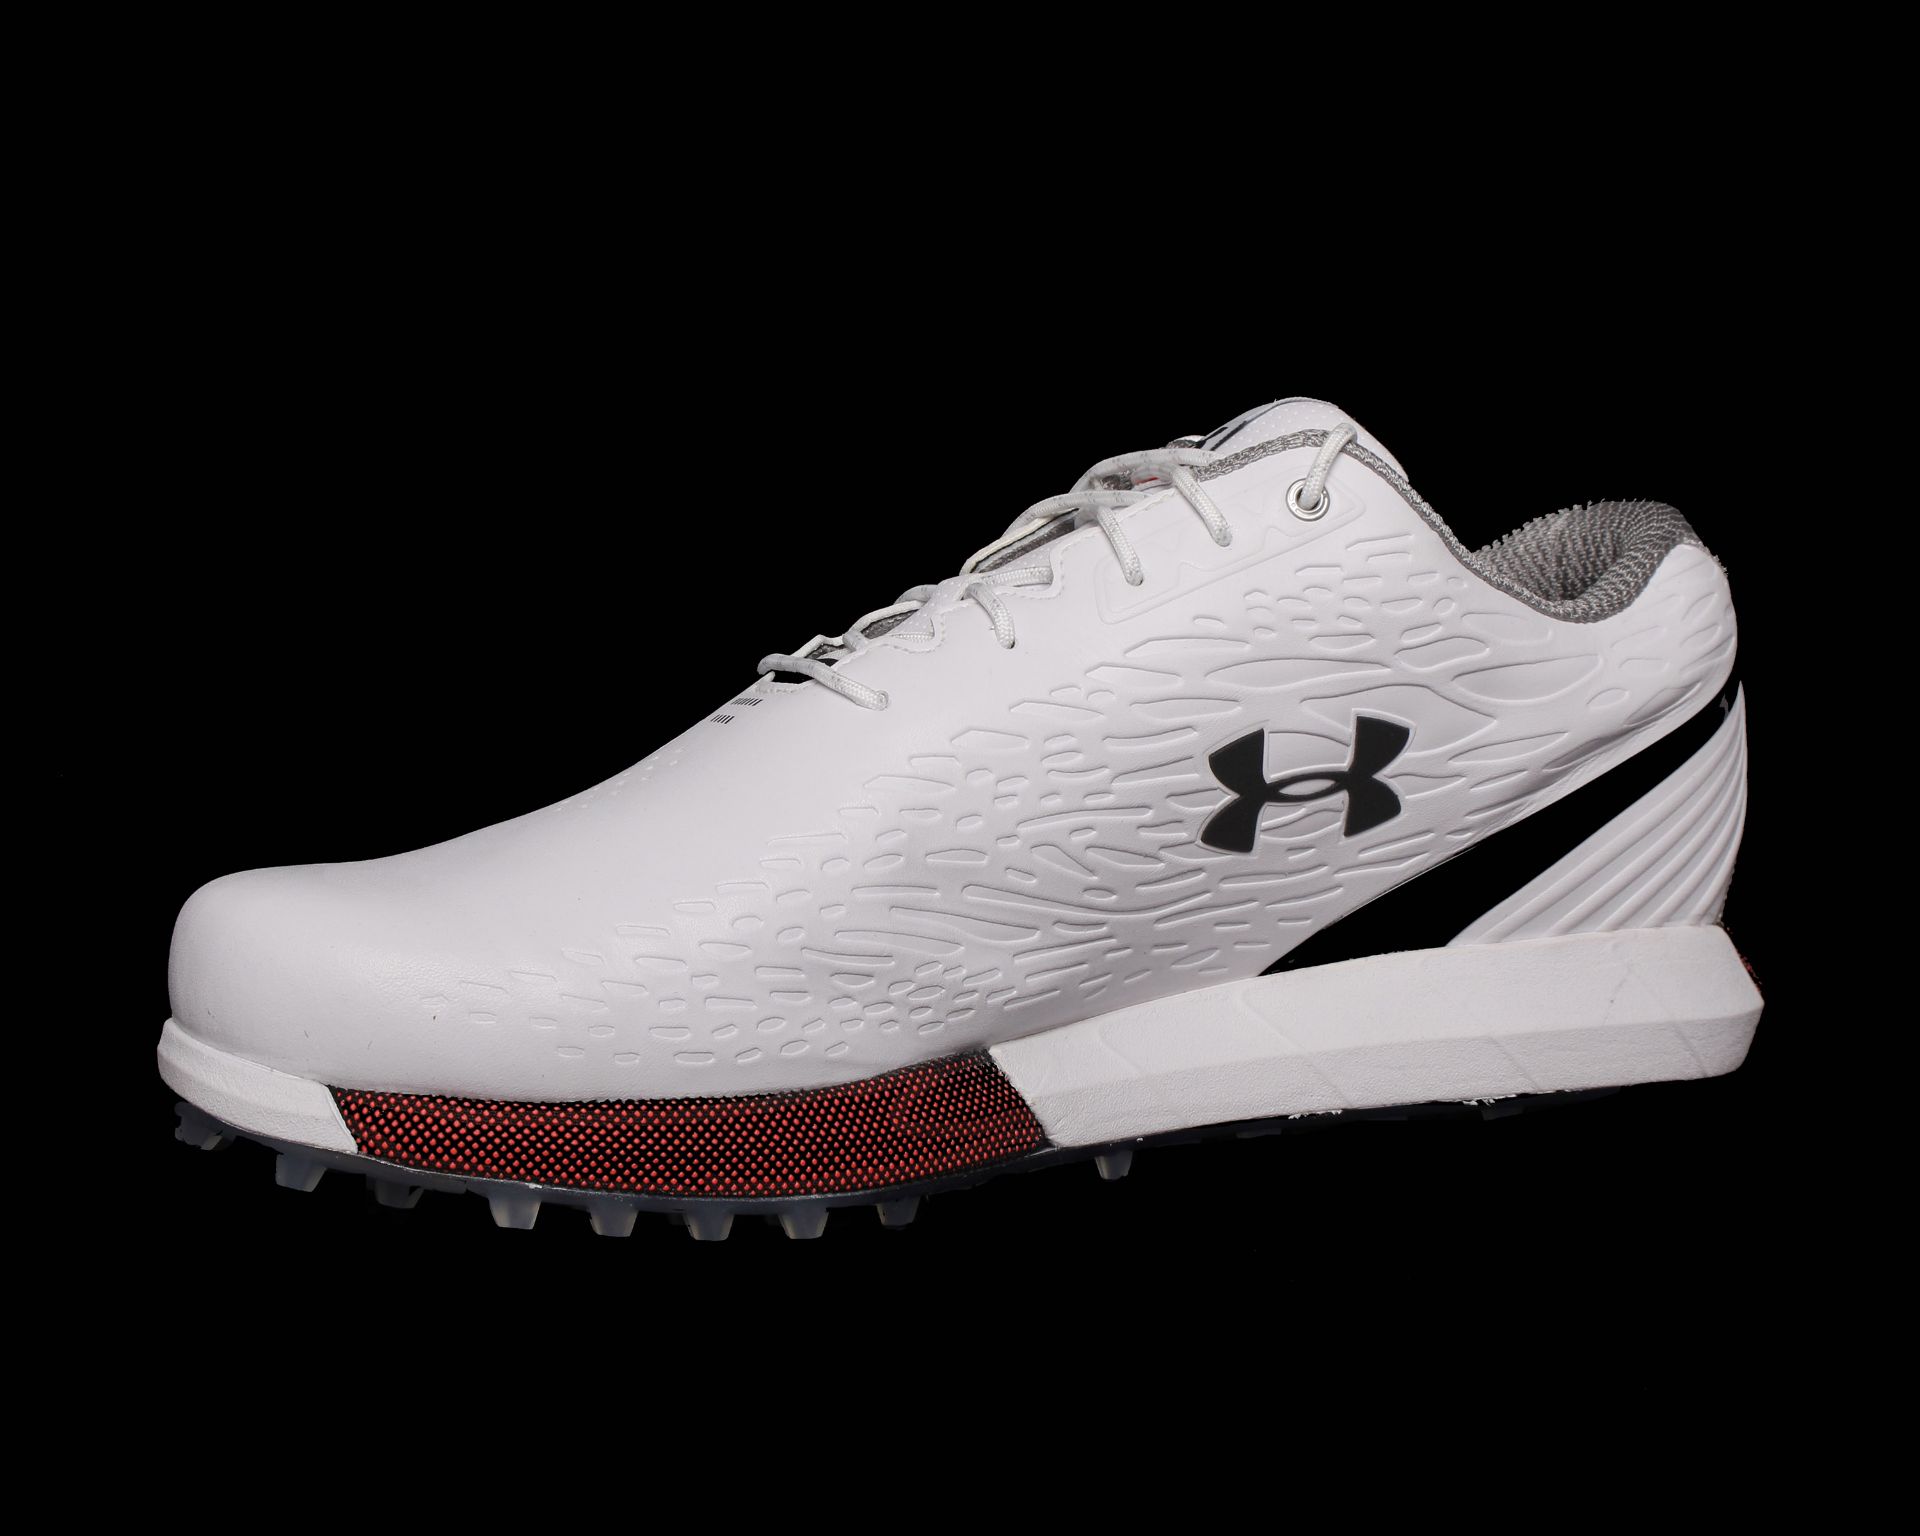 One pair of boxed as new Under Armour HOVR Show SL GTX E spike-less golf shoes in white (UK 10.5).